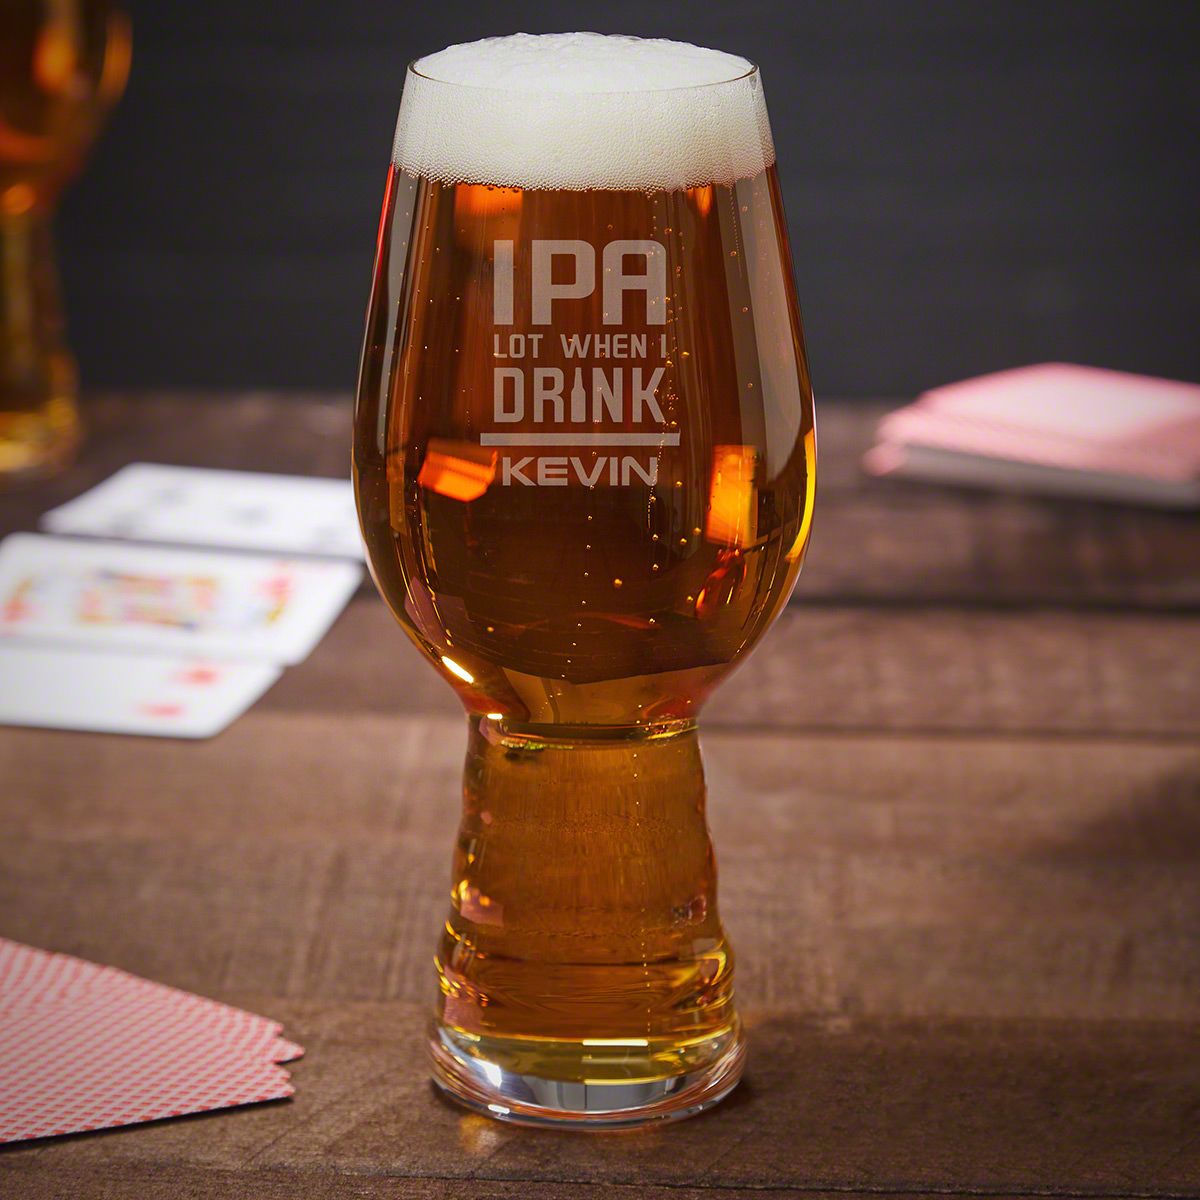 The IPA Glass - The Ultimate Glass for Enjoying an IPA